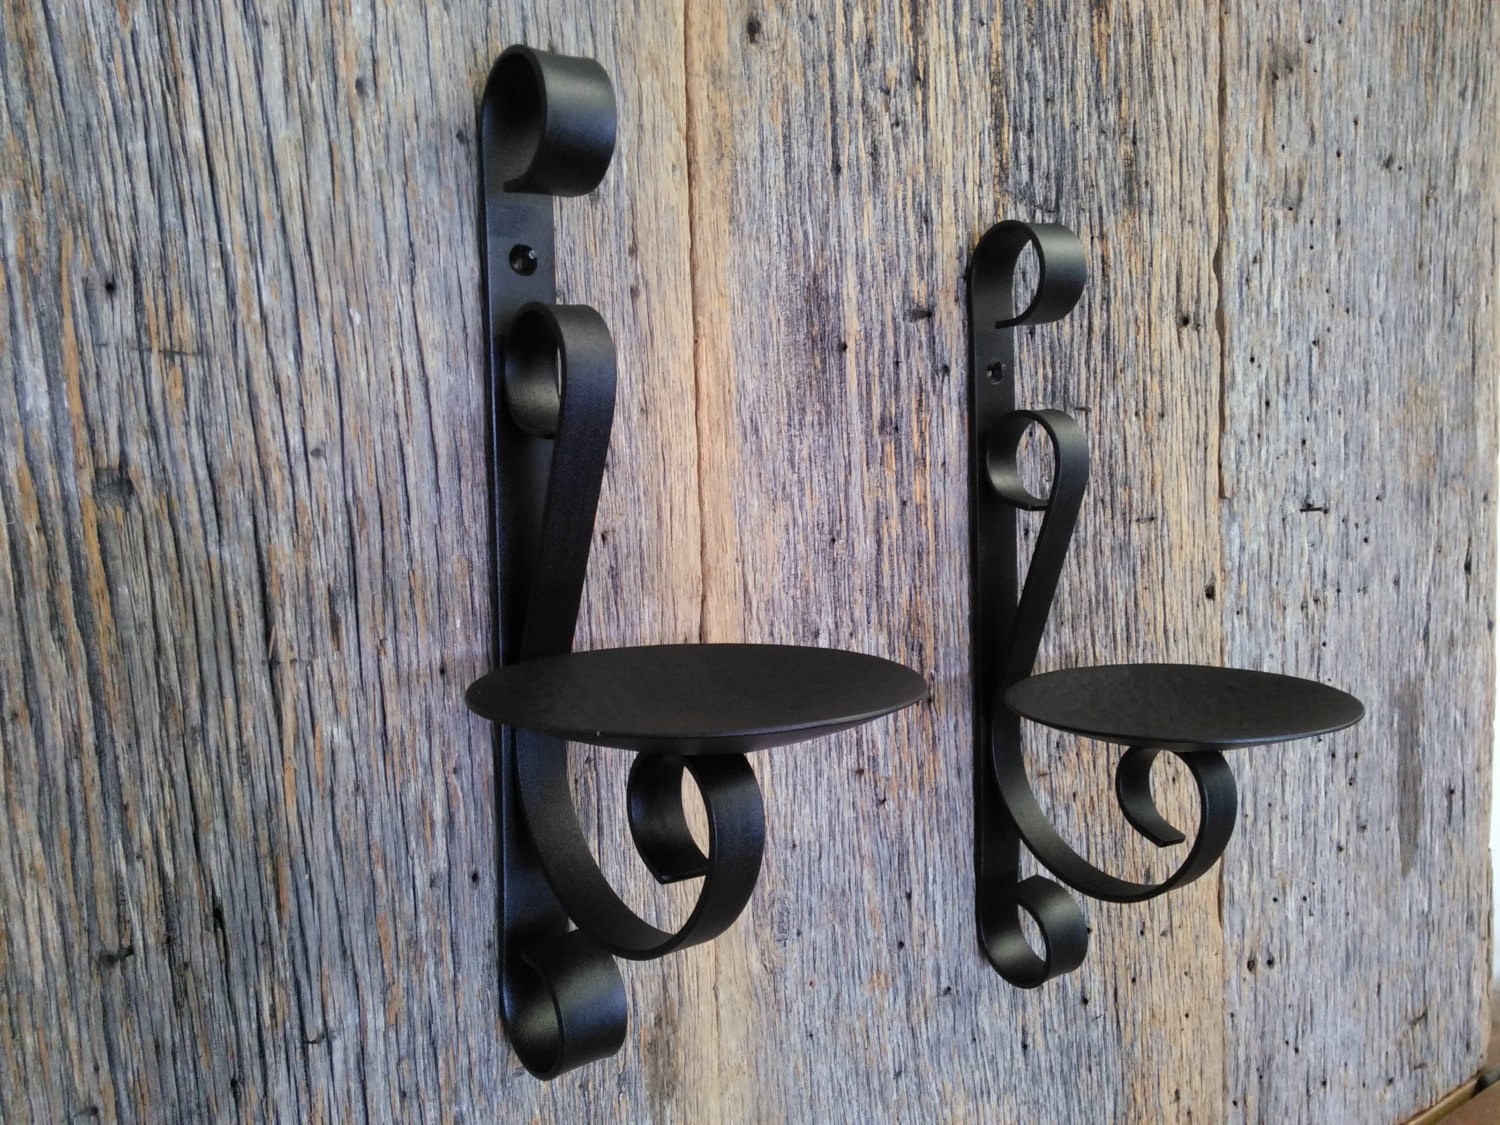 Two Metal Candle Wall Sconce Rustic Black Wrought Iron Wall Art